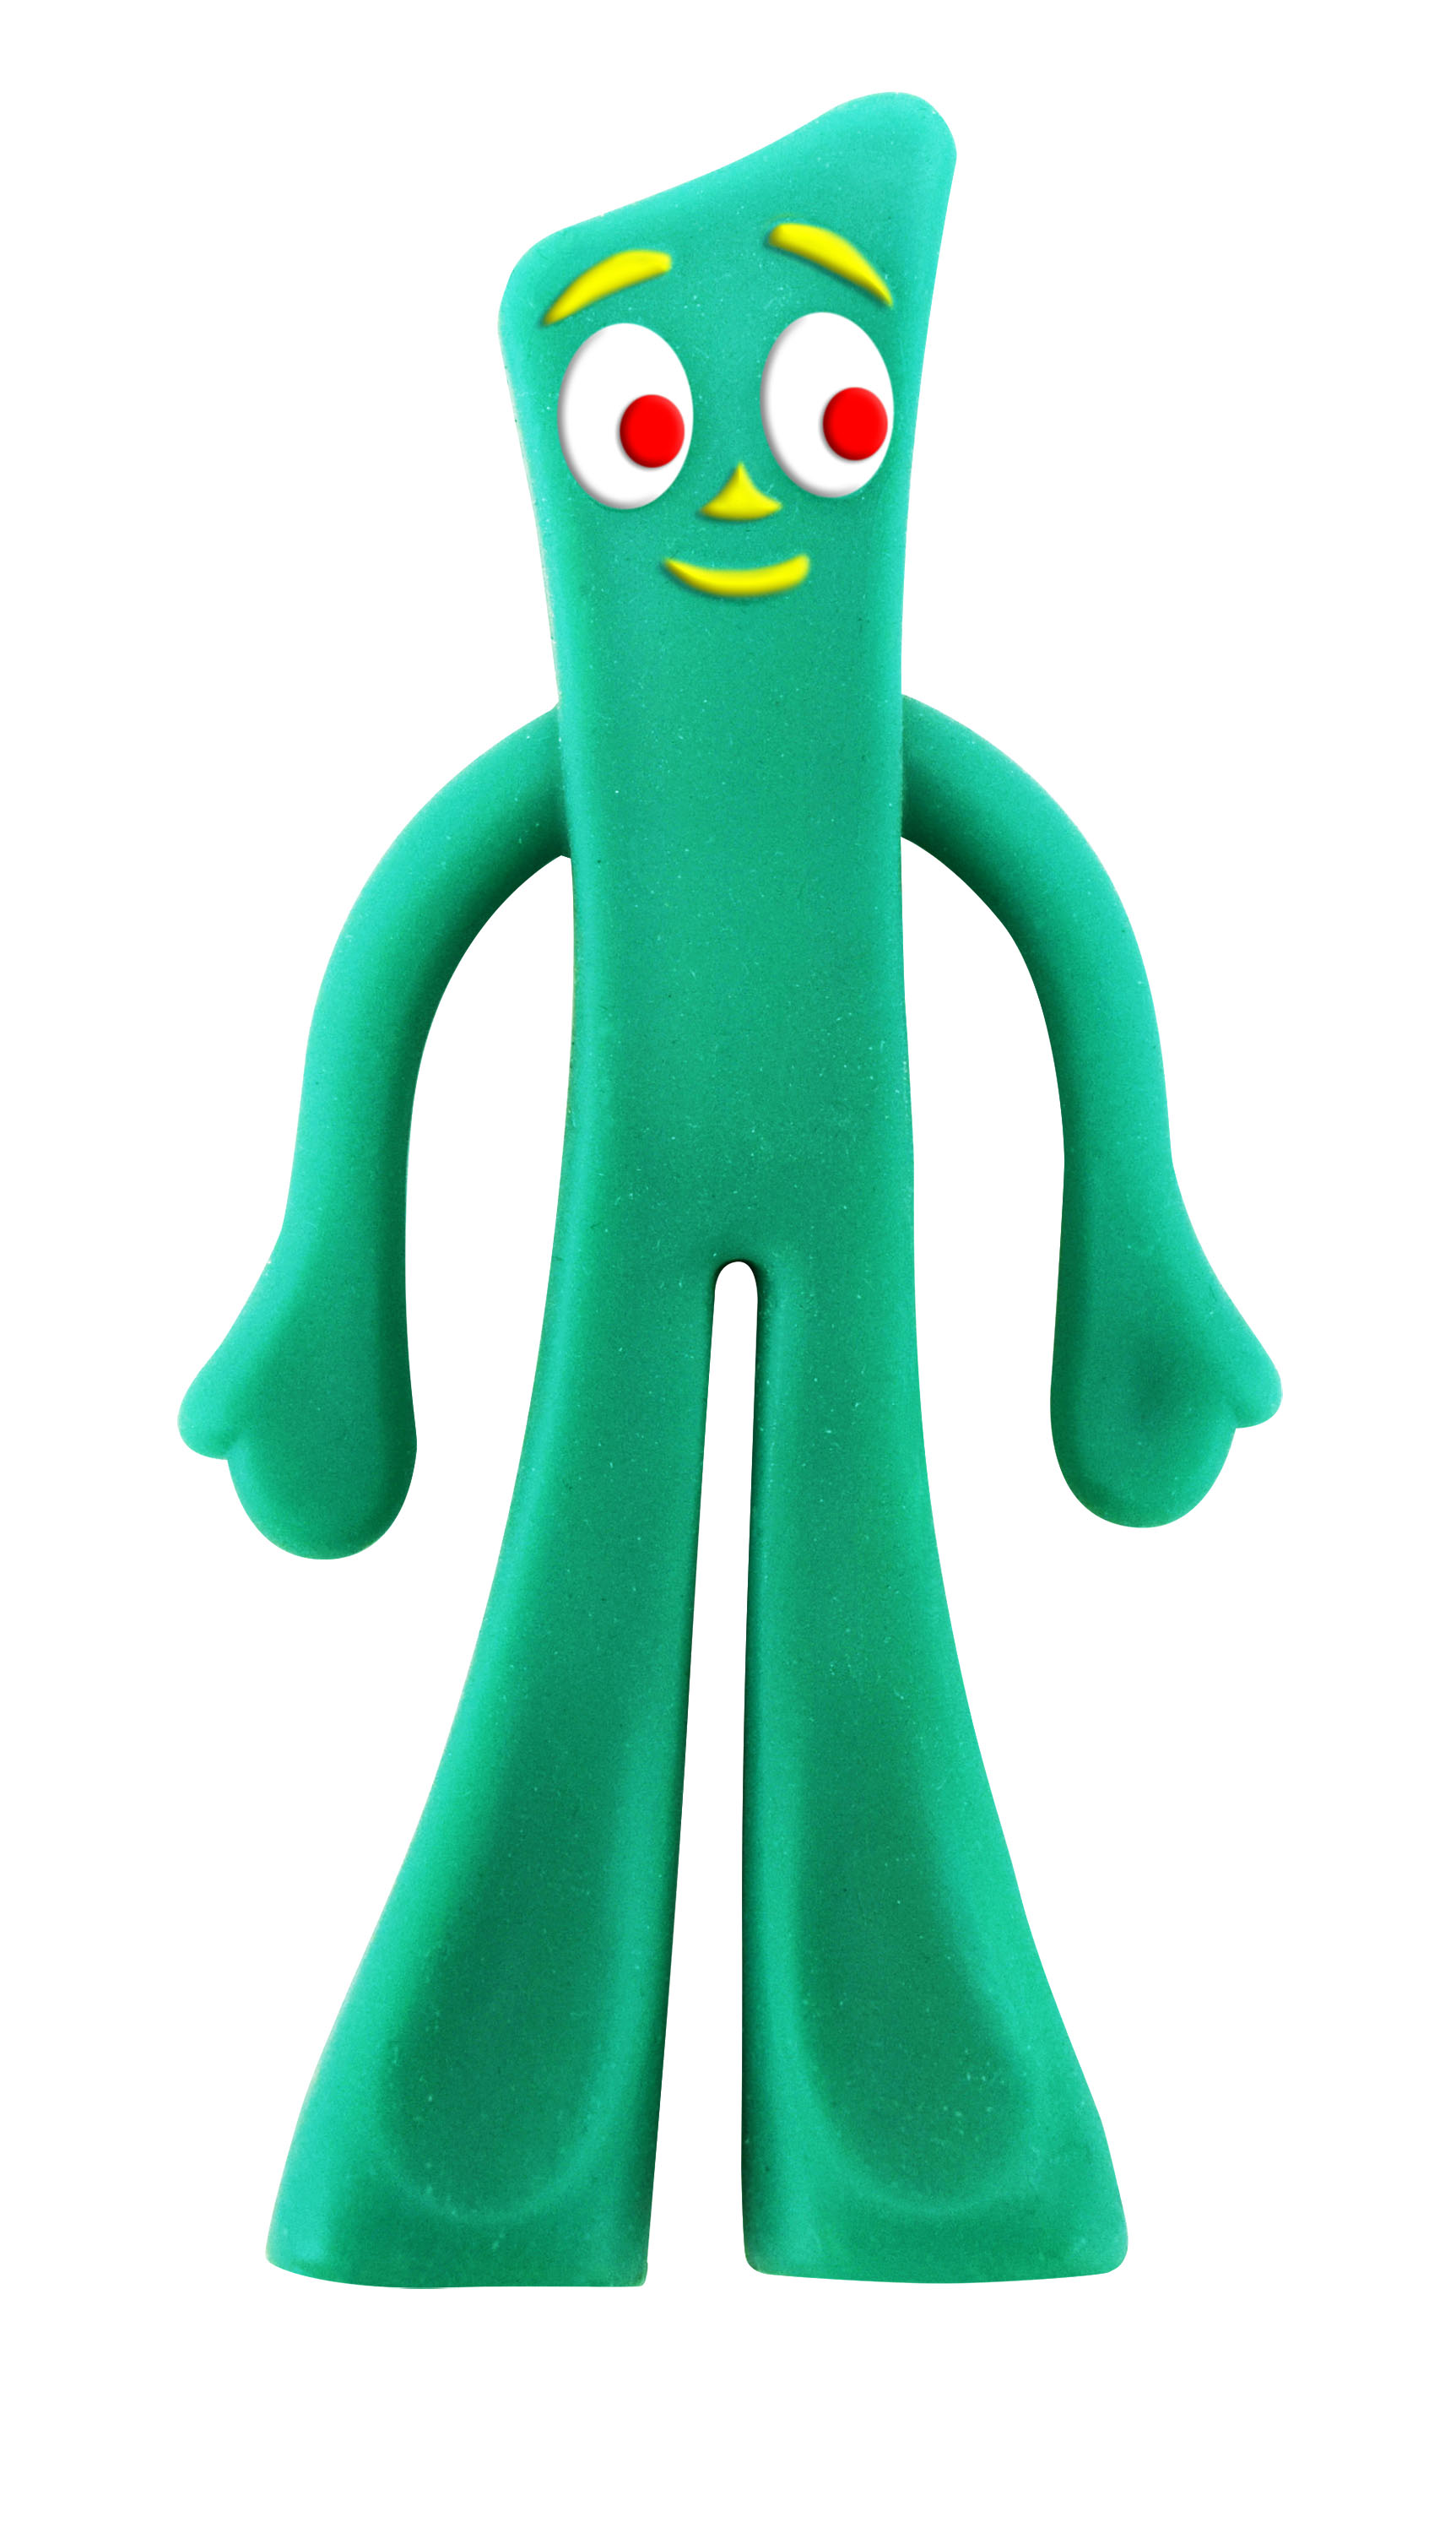 World’s Smallest Stretch Gumby.